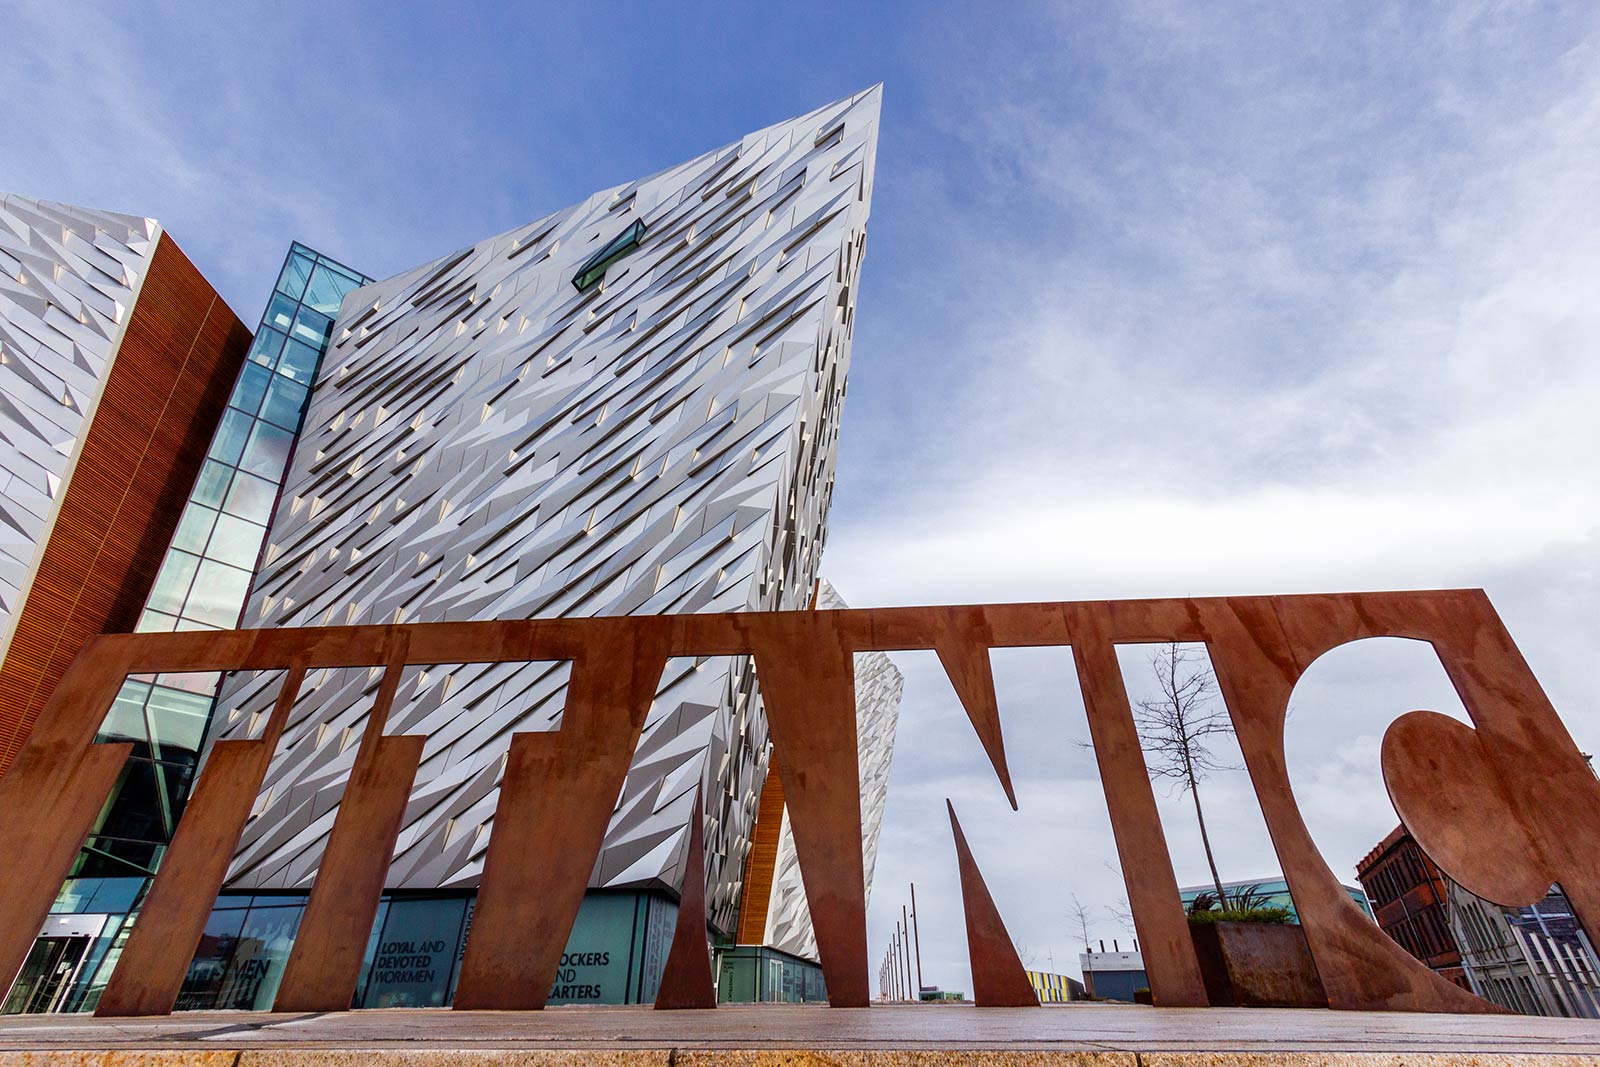 Titanic Belfast museum in Belfast, Northern Ireland. 24hrs itinerary for Belfast, drinks and petrol bombs